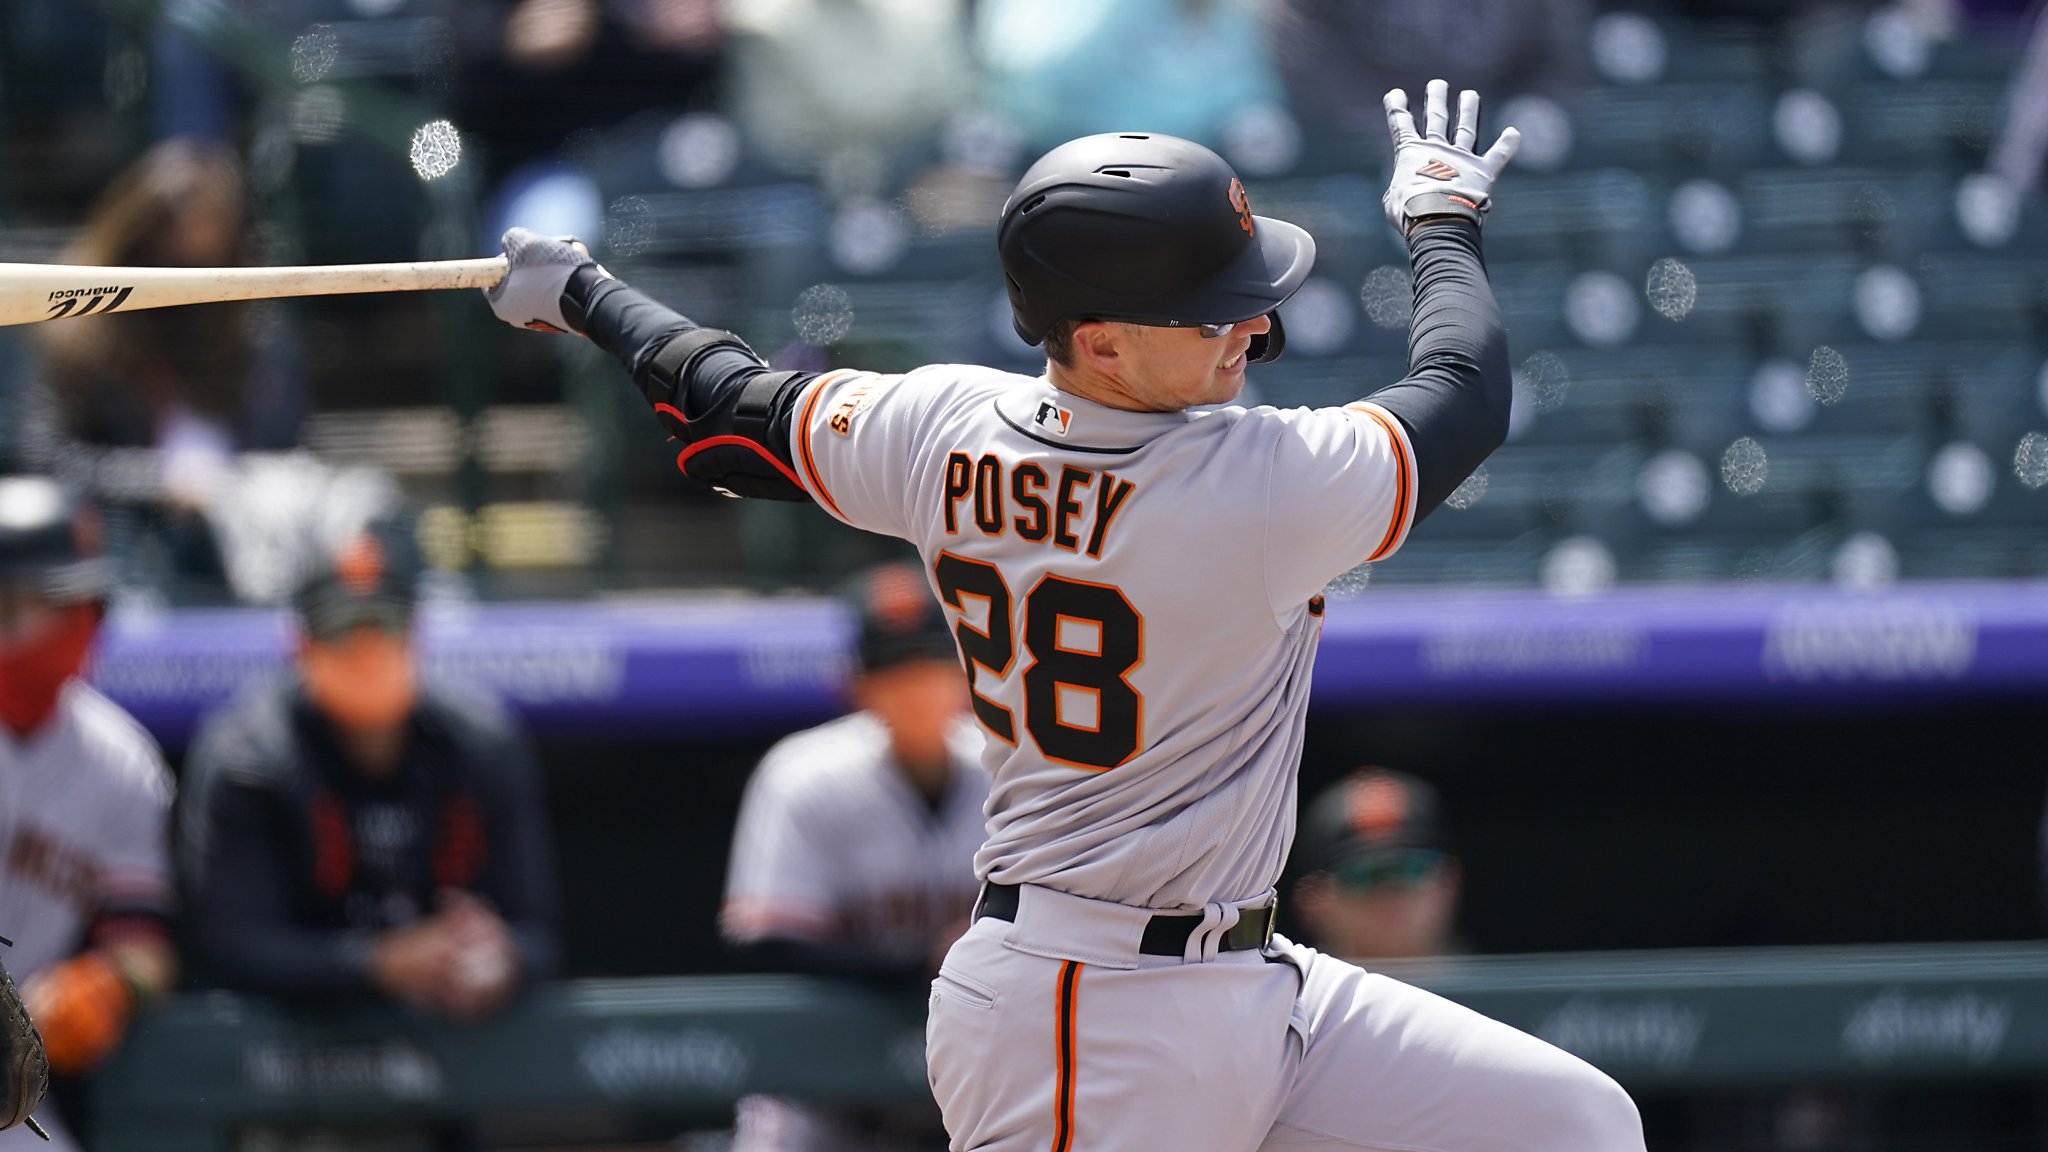 Giants' Buster Posey hitting .382 but doesn't qualify for batting